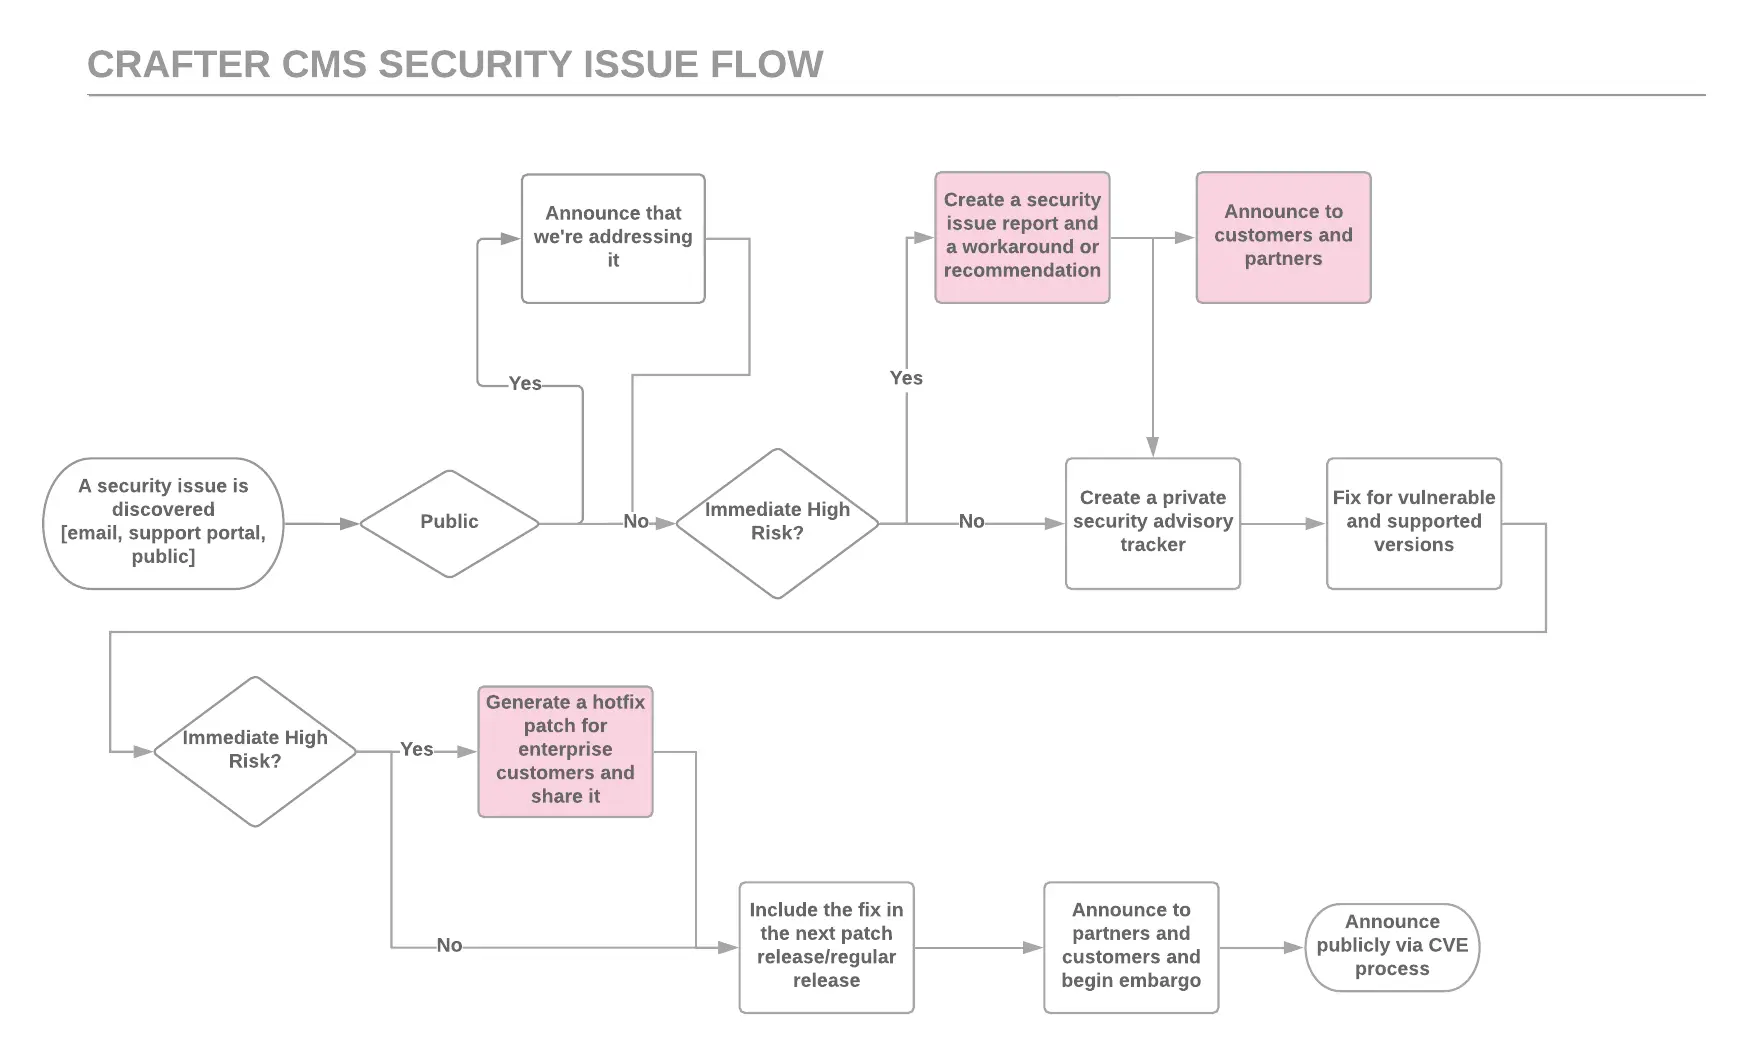 CrafterCMS Security Issue Flow